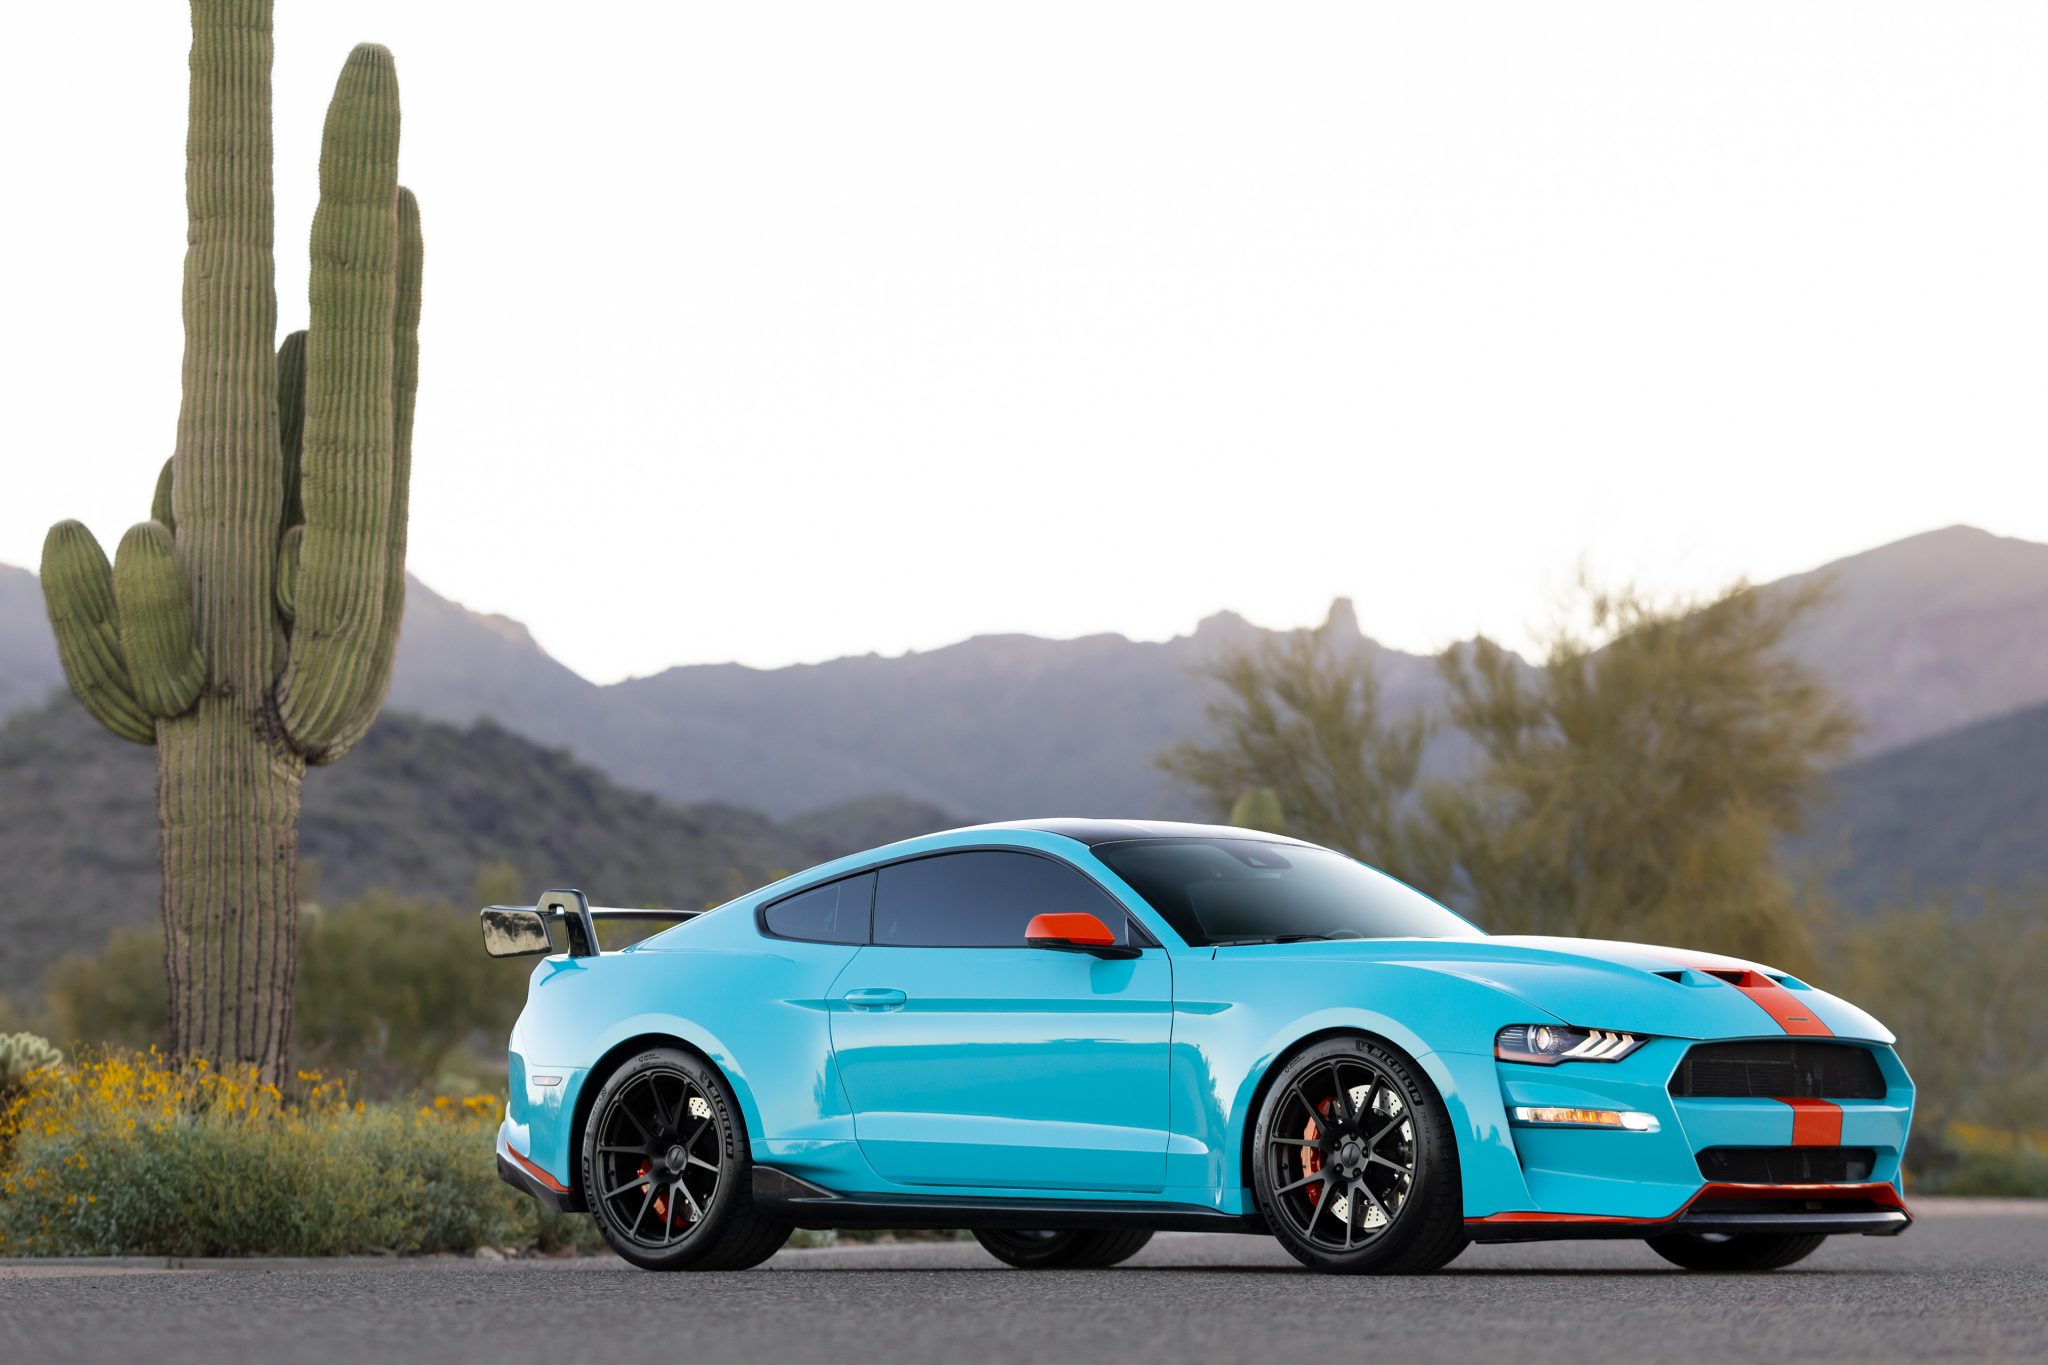 Used 2019 Ford Mustang Revenge GT Coupe Review